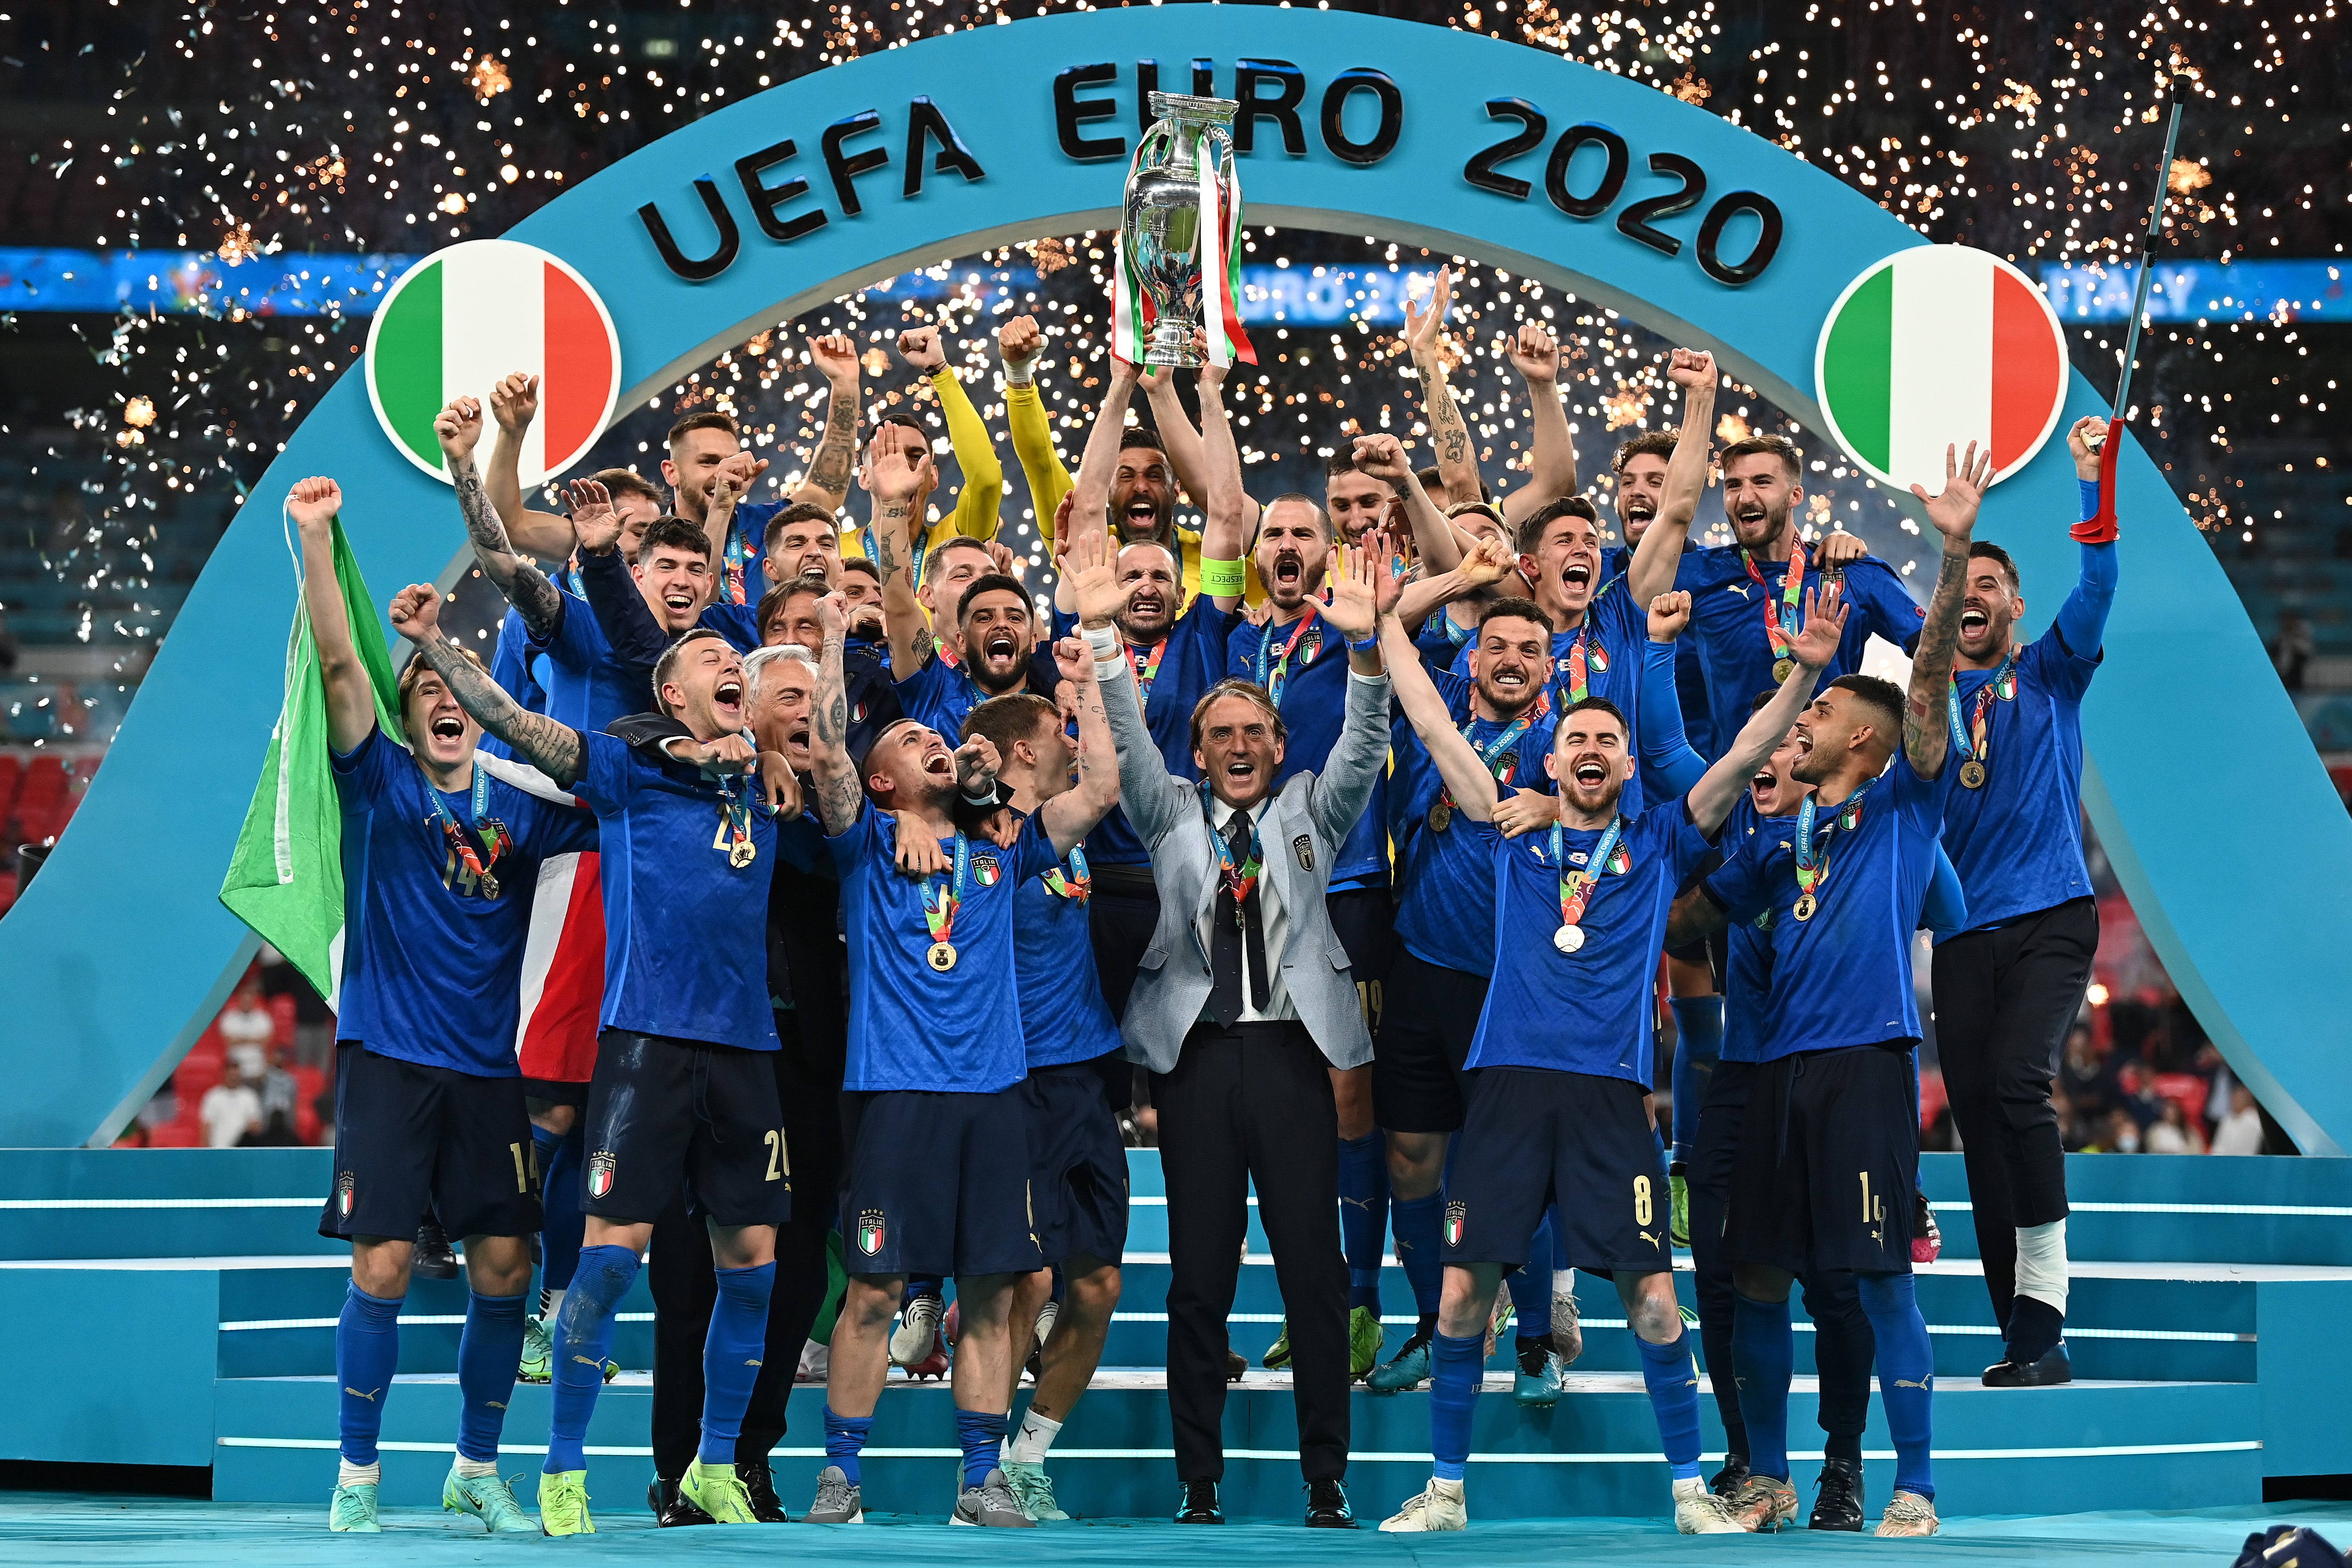 Italy defeated England in the final of Euro 2020 this summer